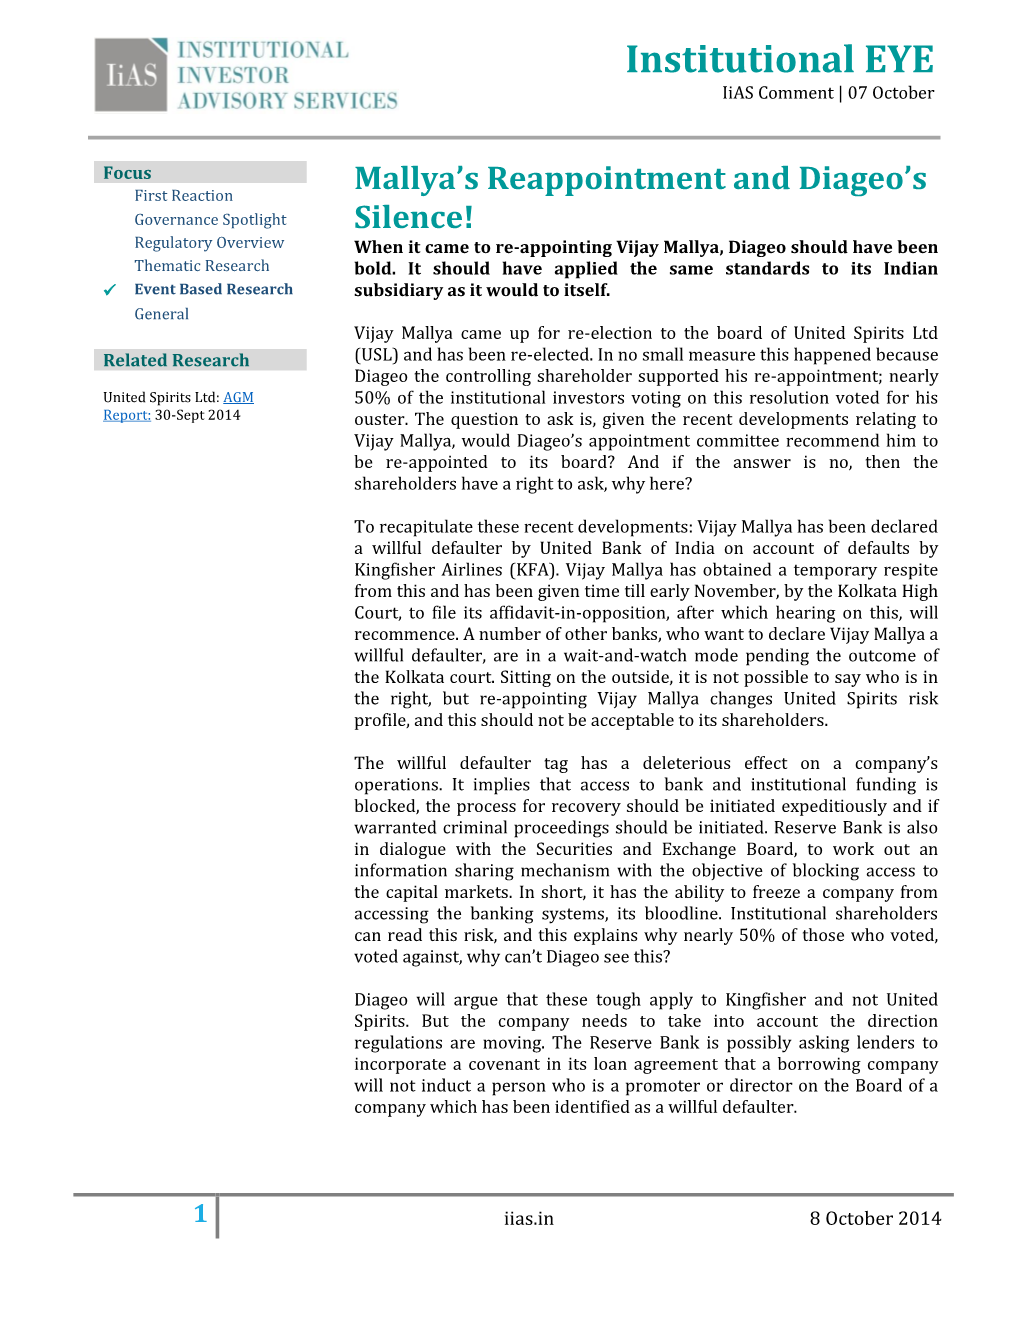 Mallya's Reappointment and Diageo's Silence!